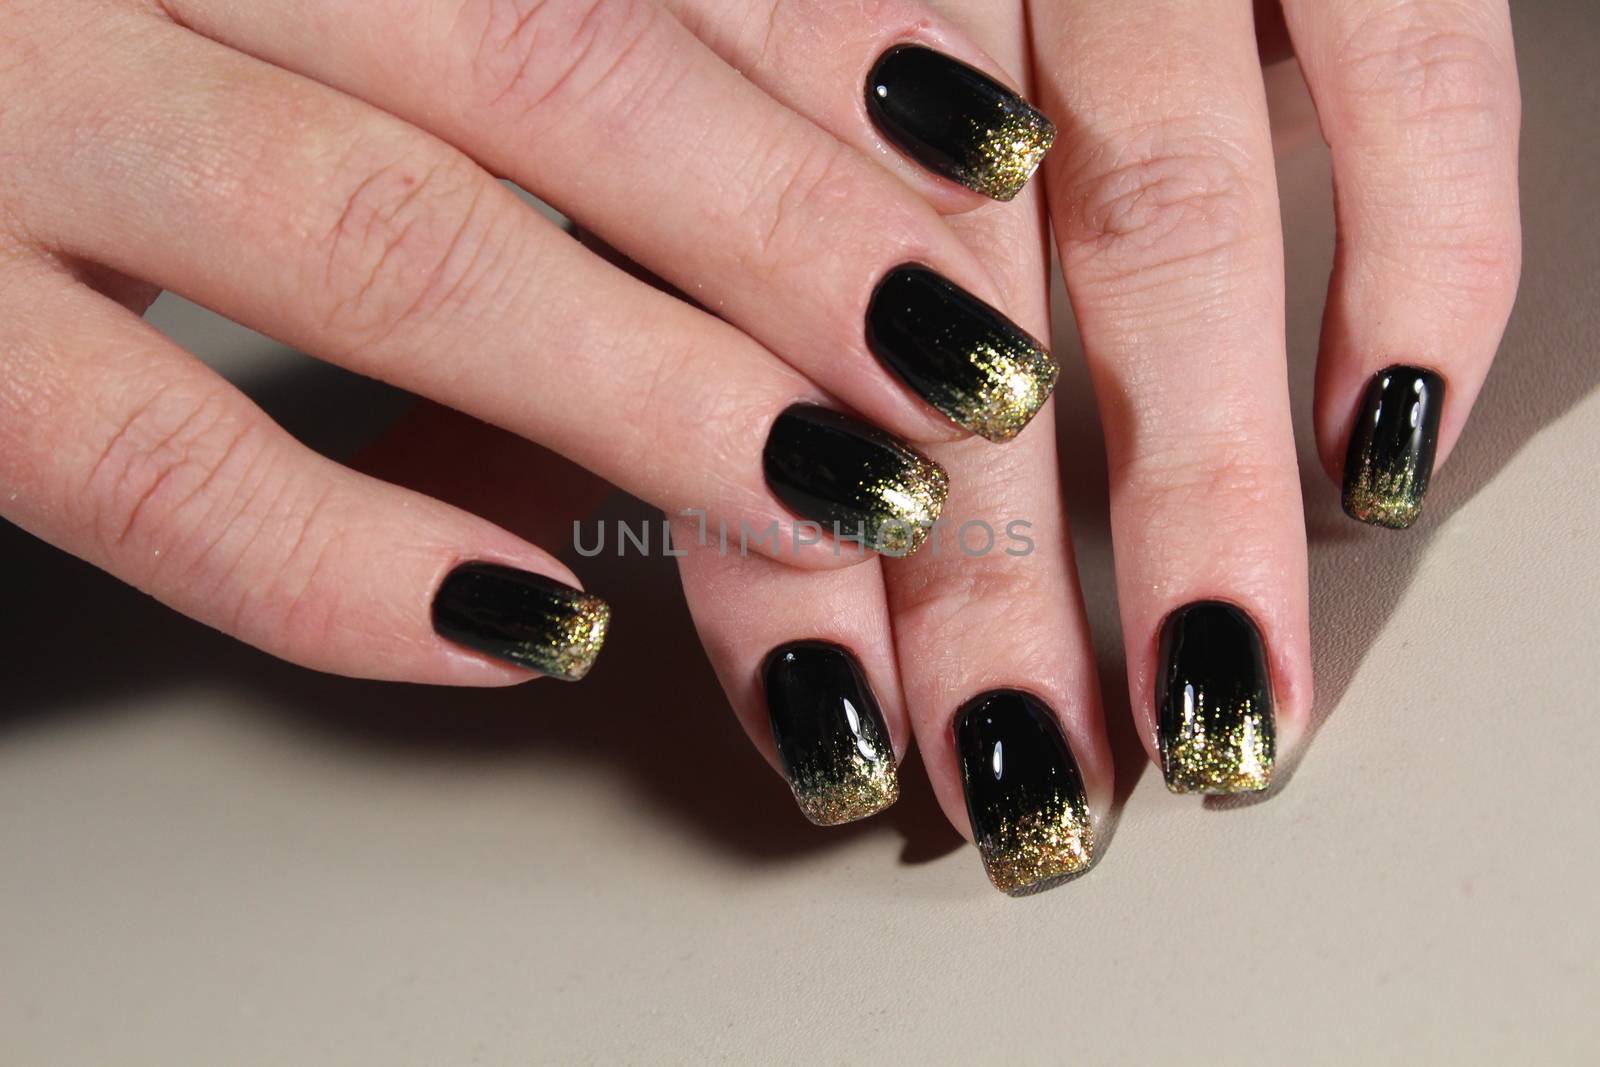 Evening manicure design in black and gold color. bast